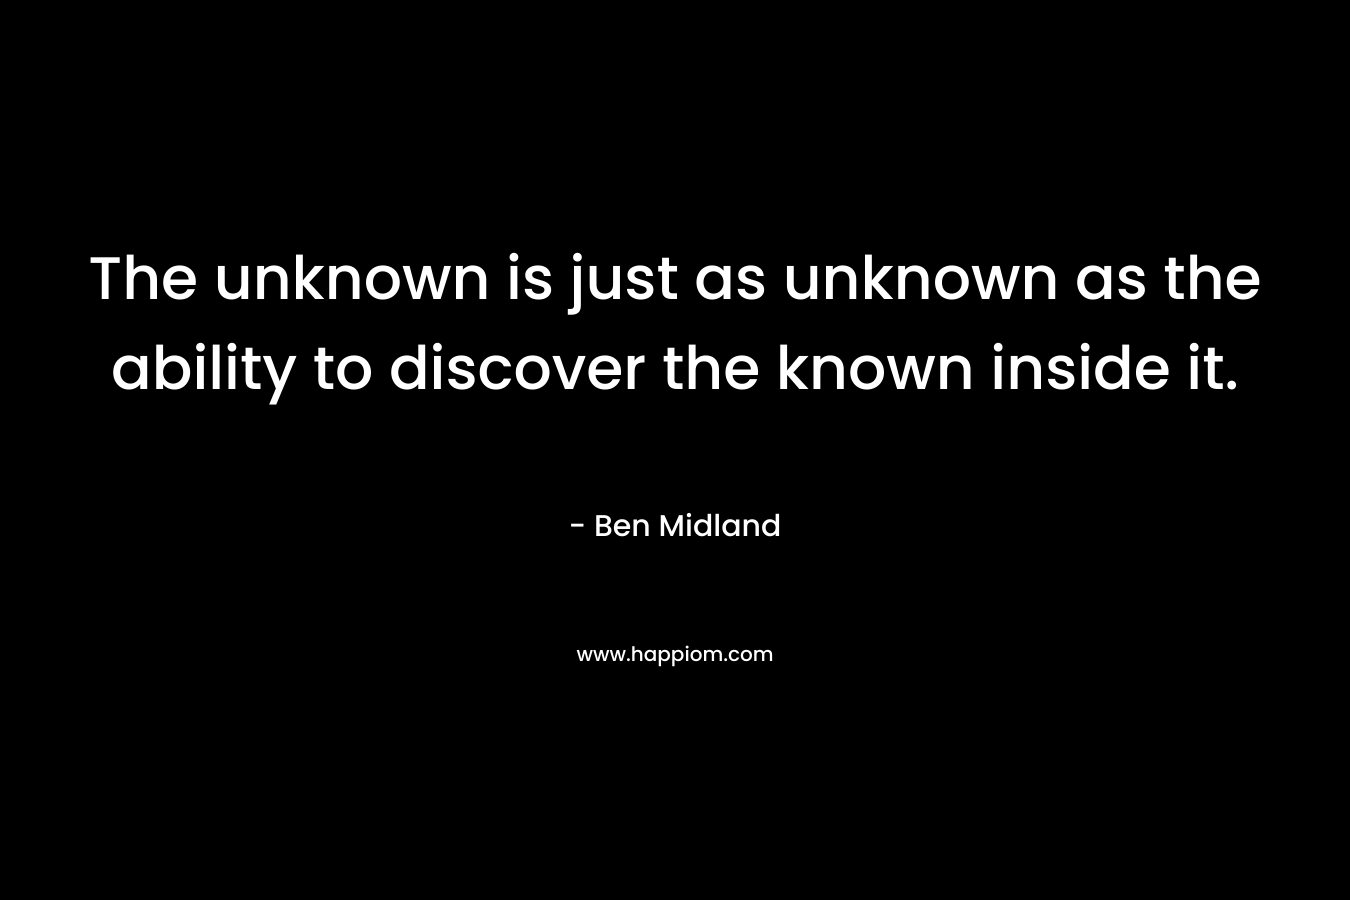 The unknown is just as unknown as the ability to discover the known inside it.